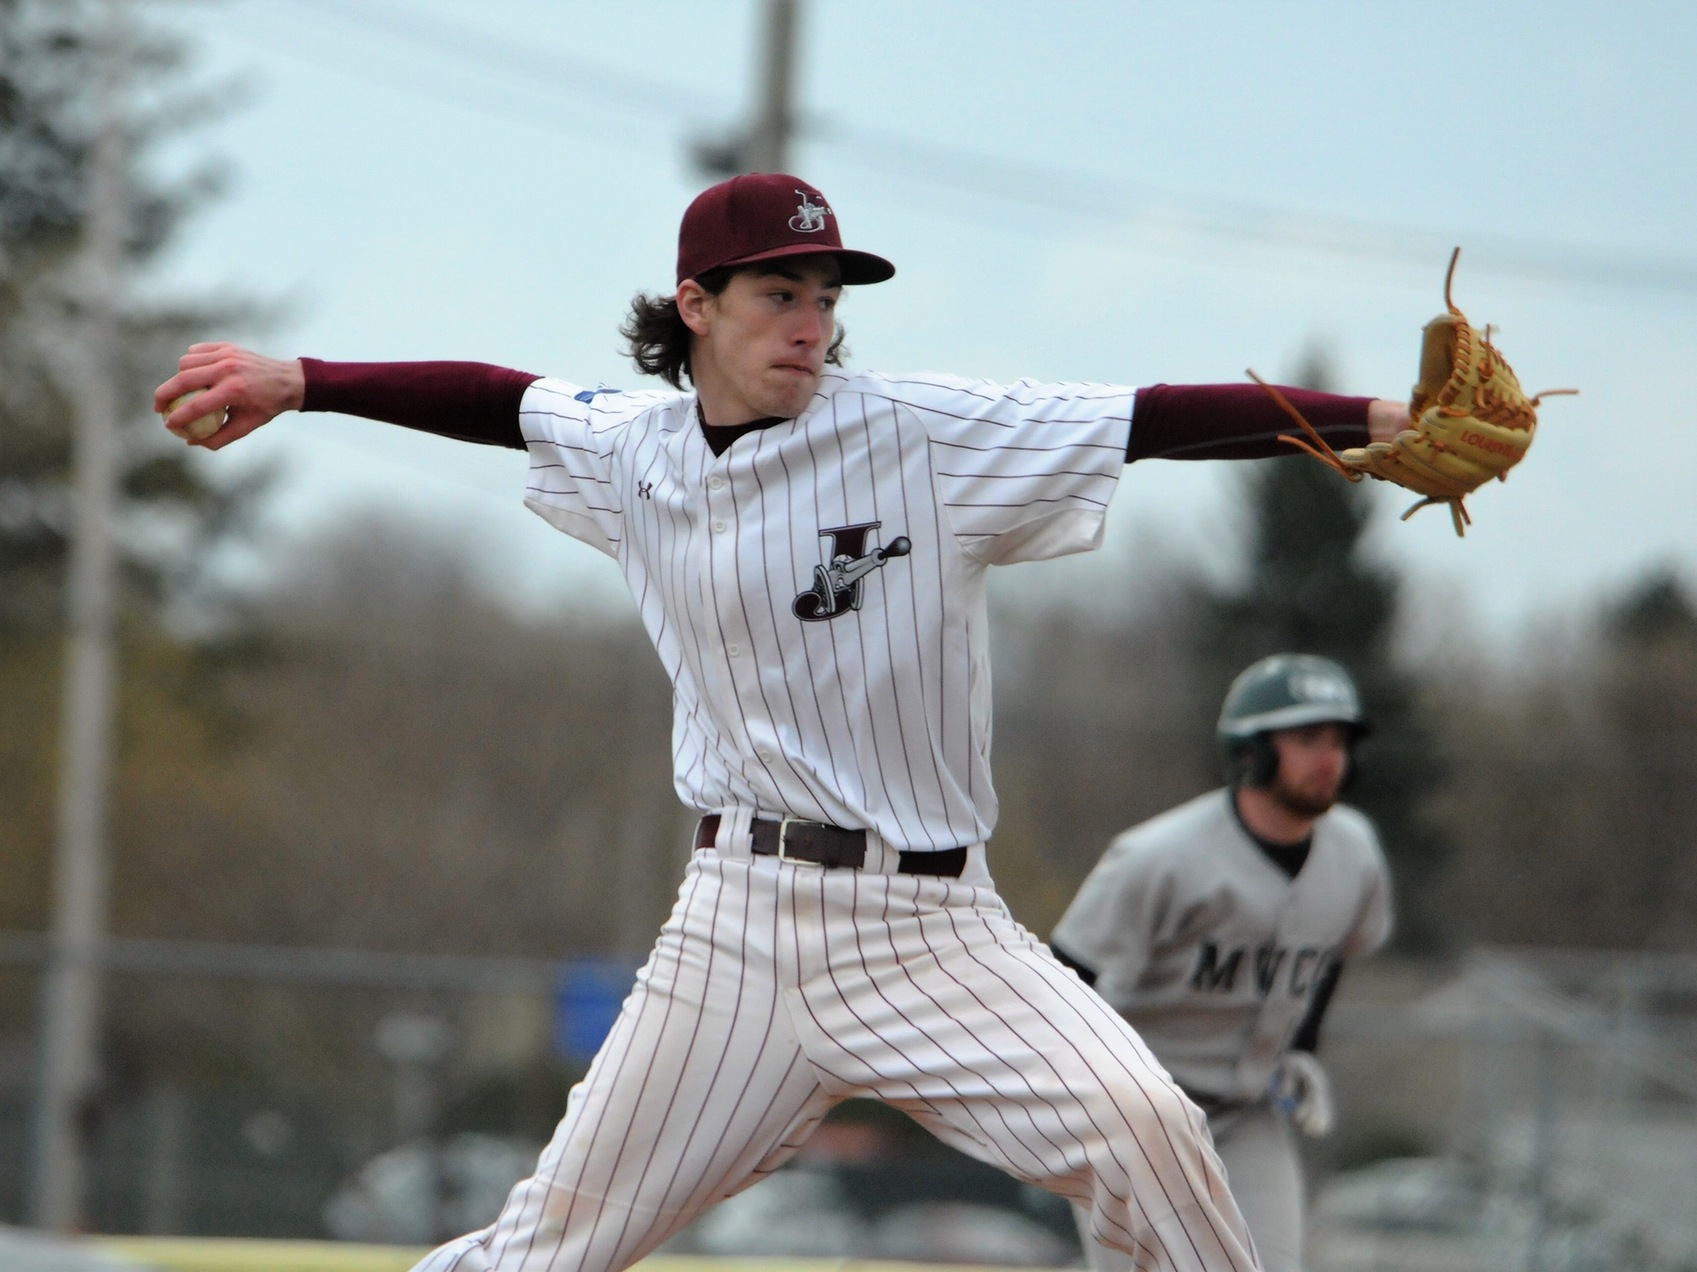 JCC Baseball Takes Care of Business Down in Schenectady